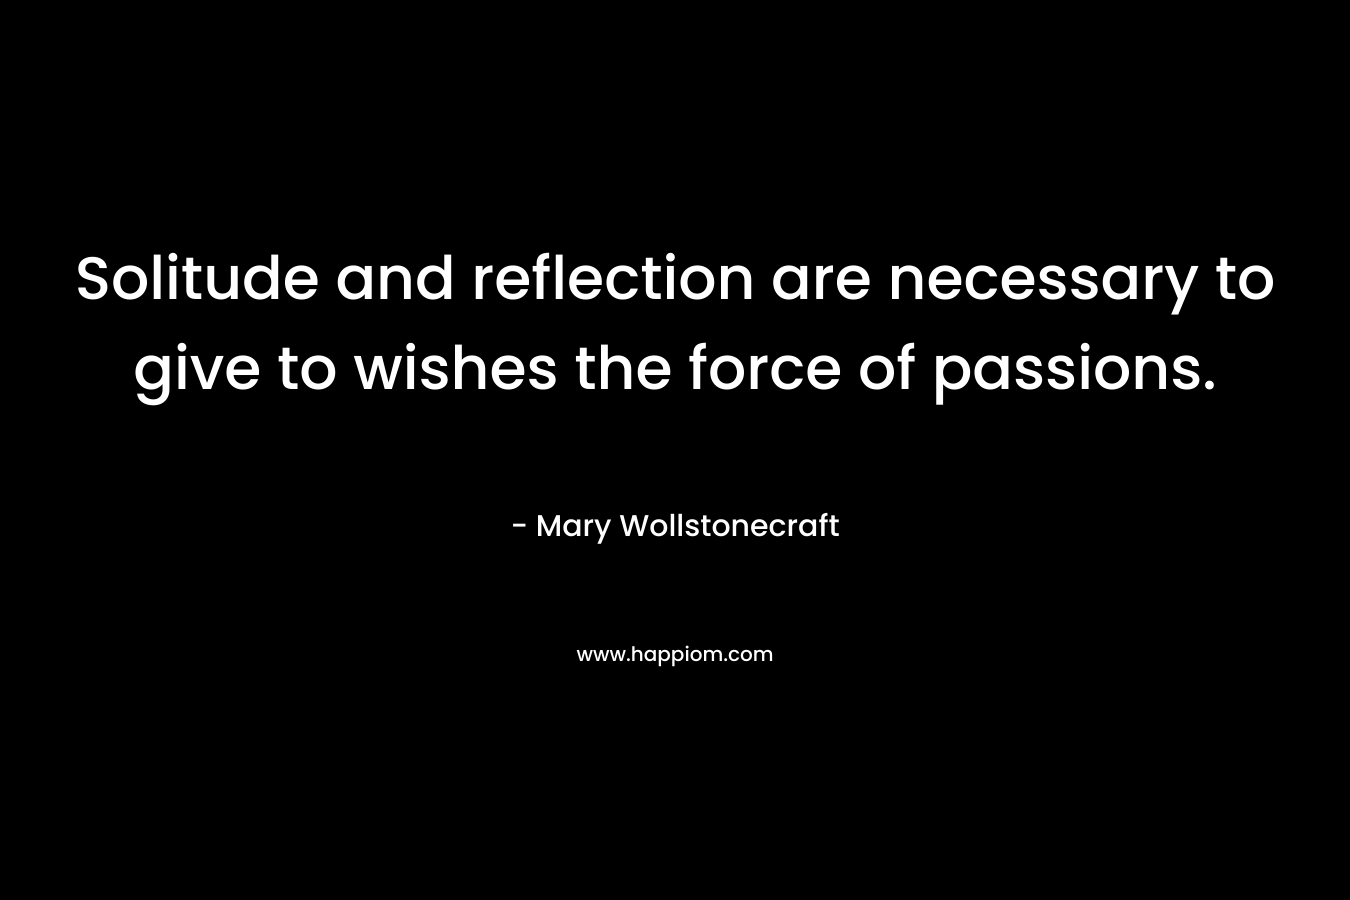 Solitude and reflection are necessary to give to wishes the force of passions.